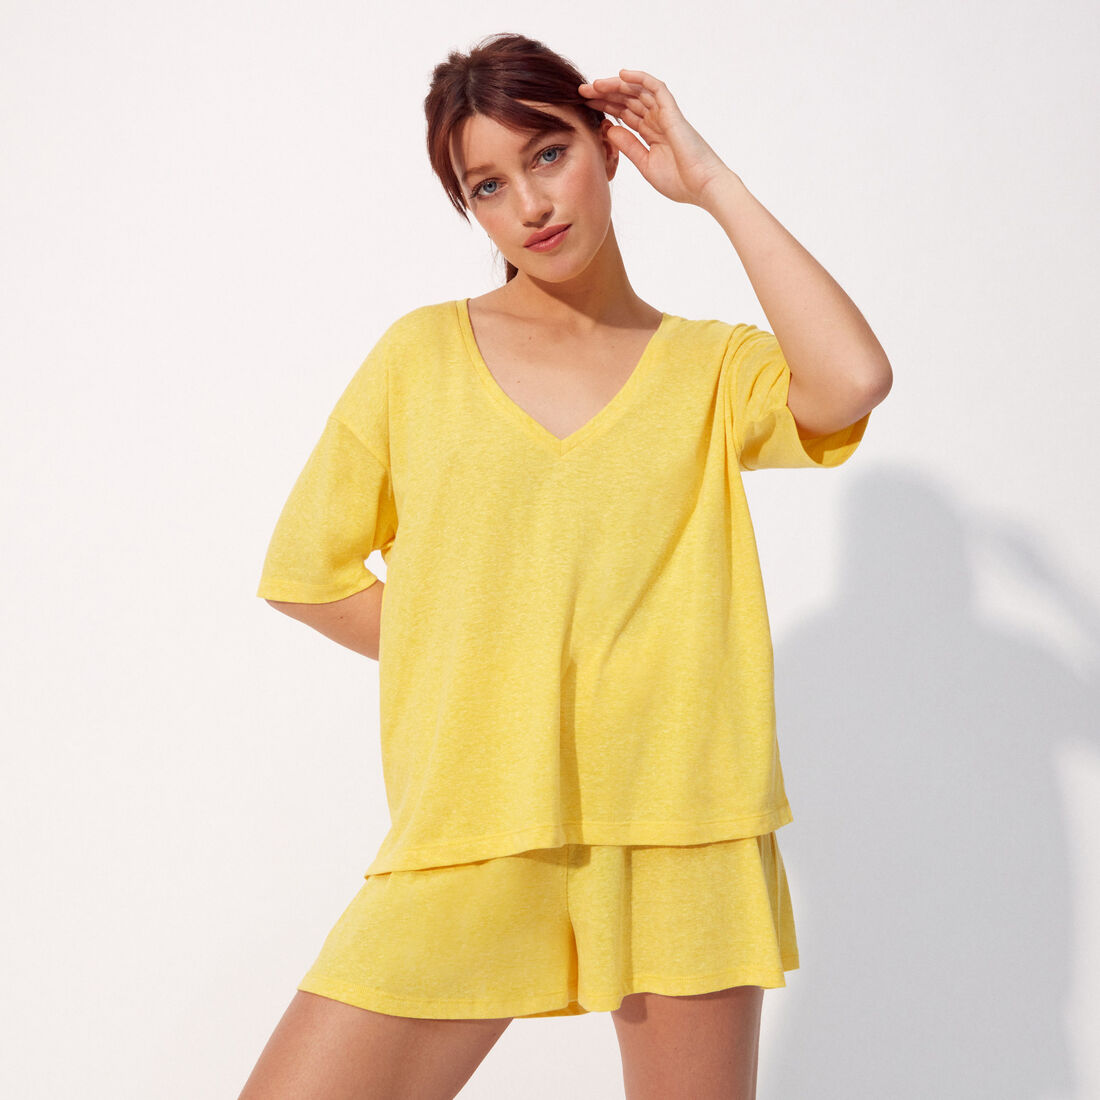 short-sleeved loose-fitting t-shirt;